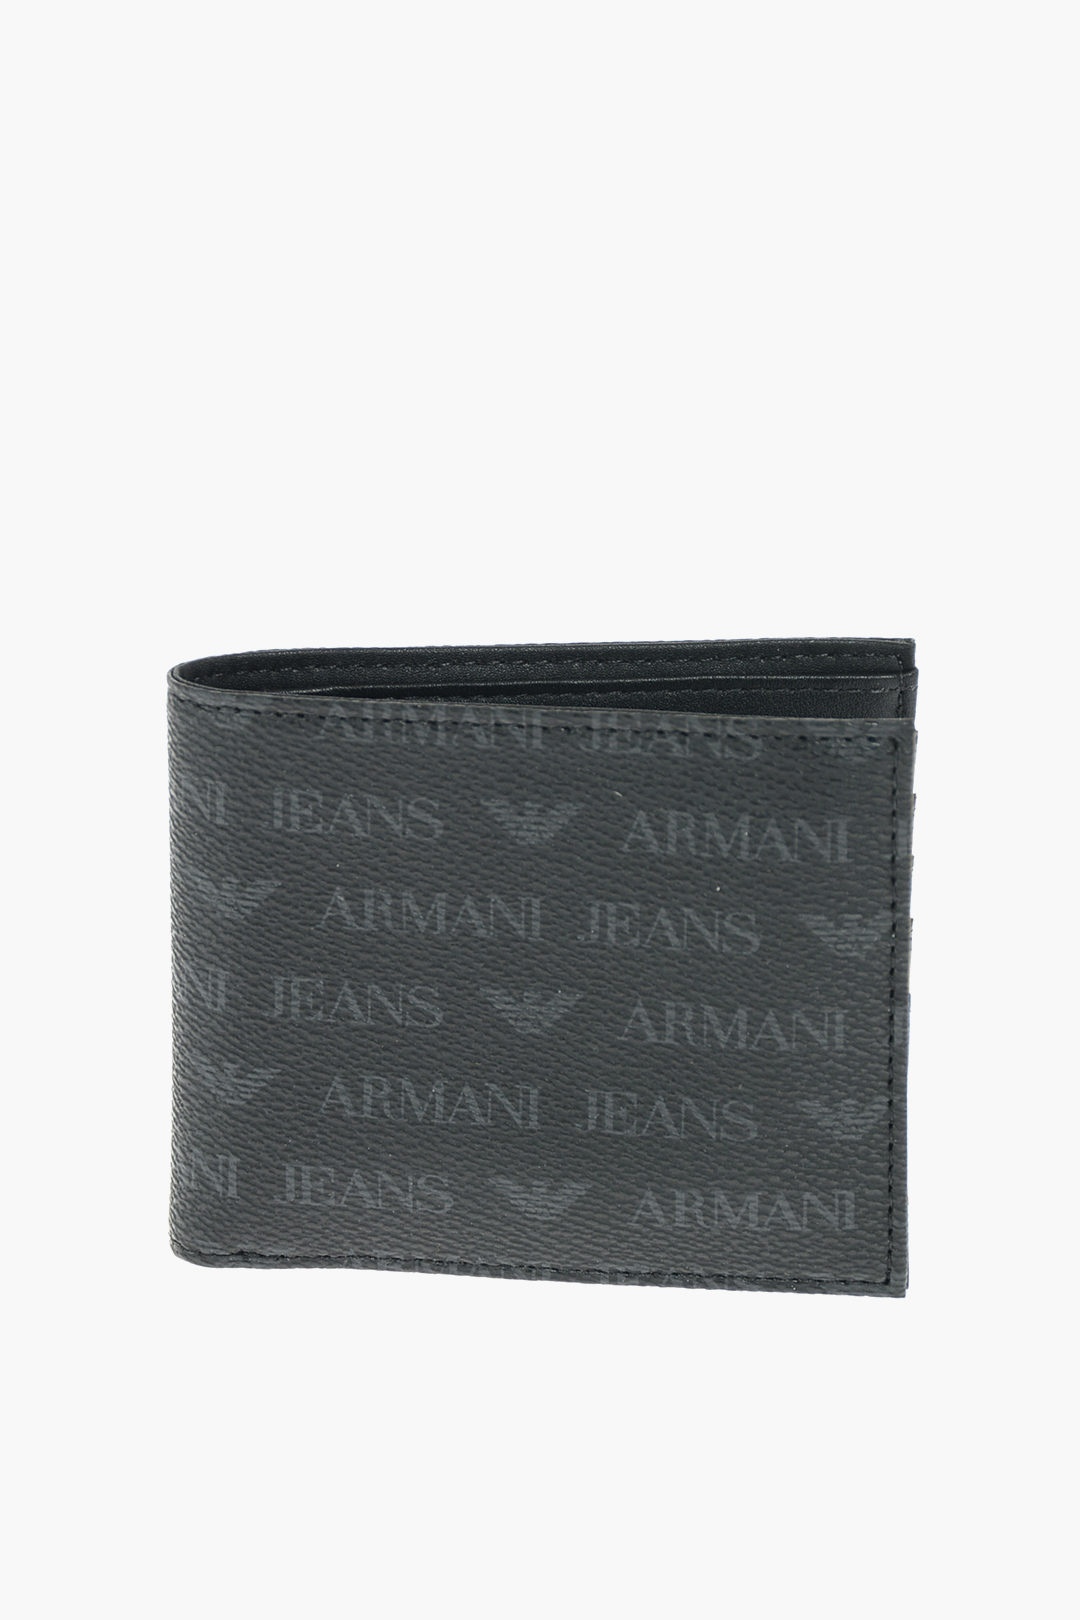 Armani JEANS all over logo faux leather wallet men - Glamood Outlet